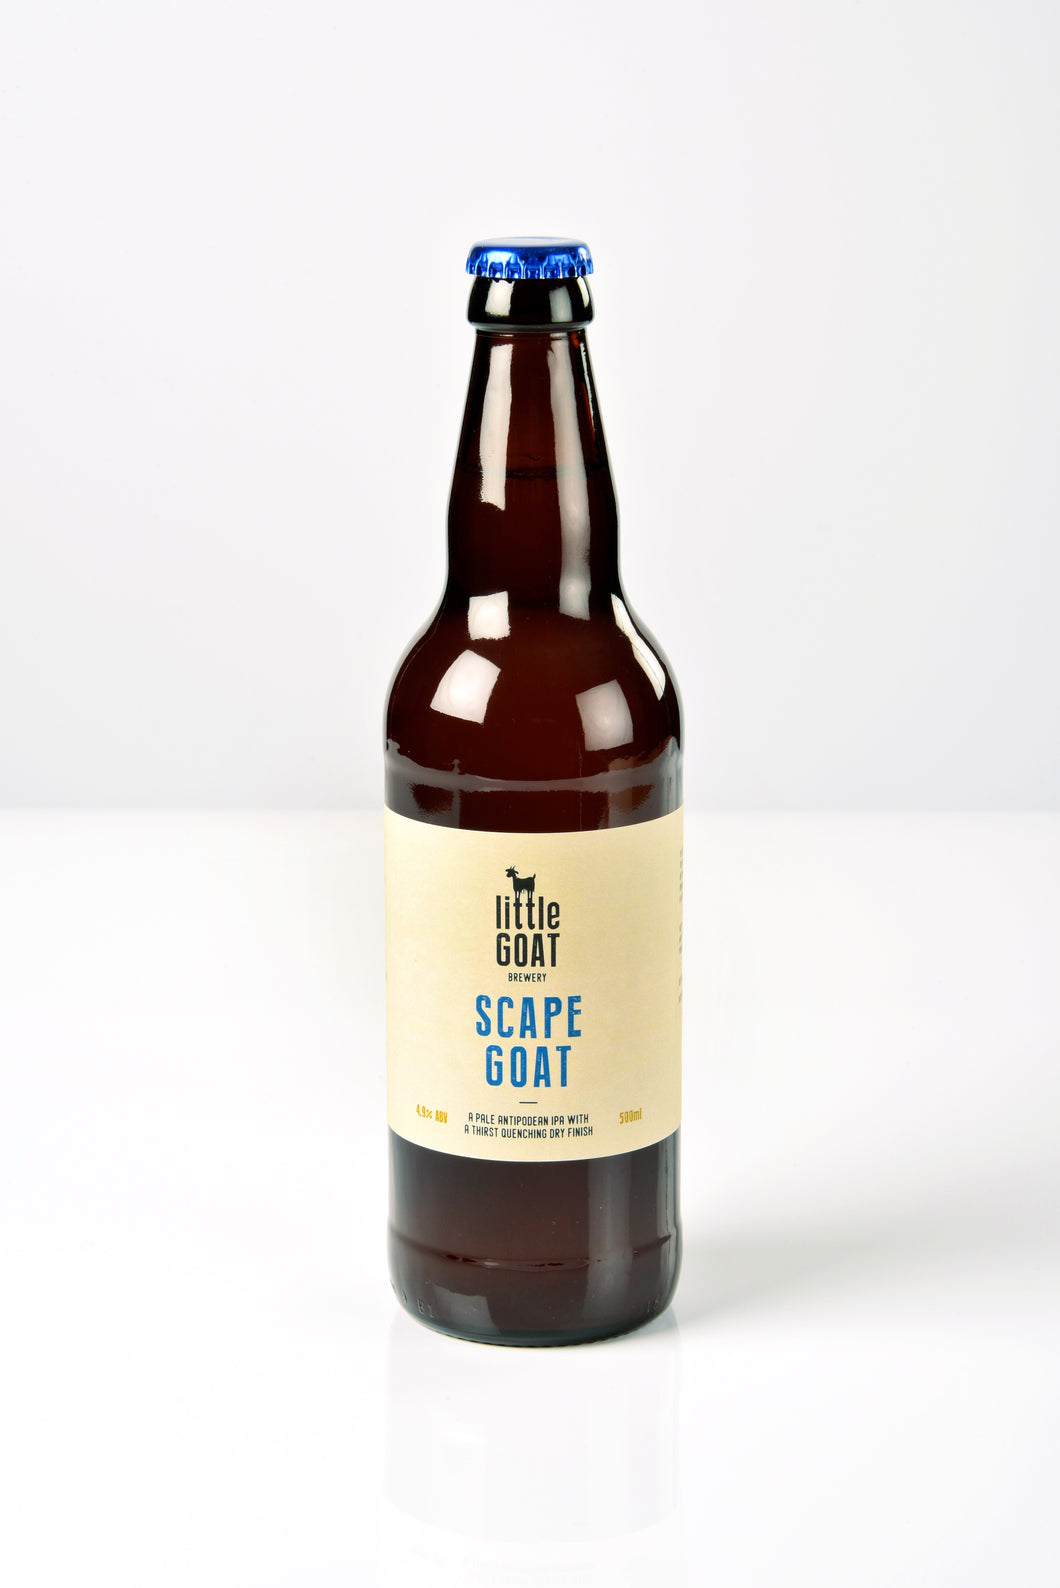 Scape Goat - Antipodean IPA - 4.9% ABV